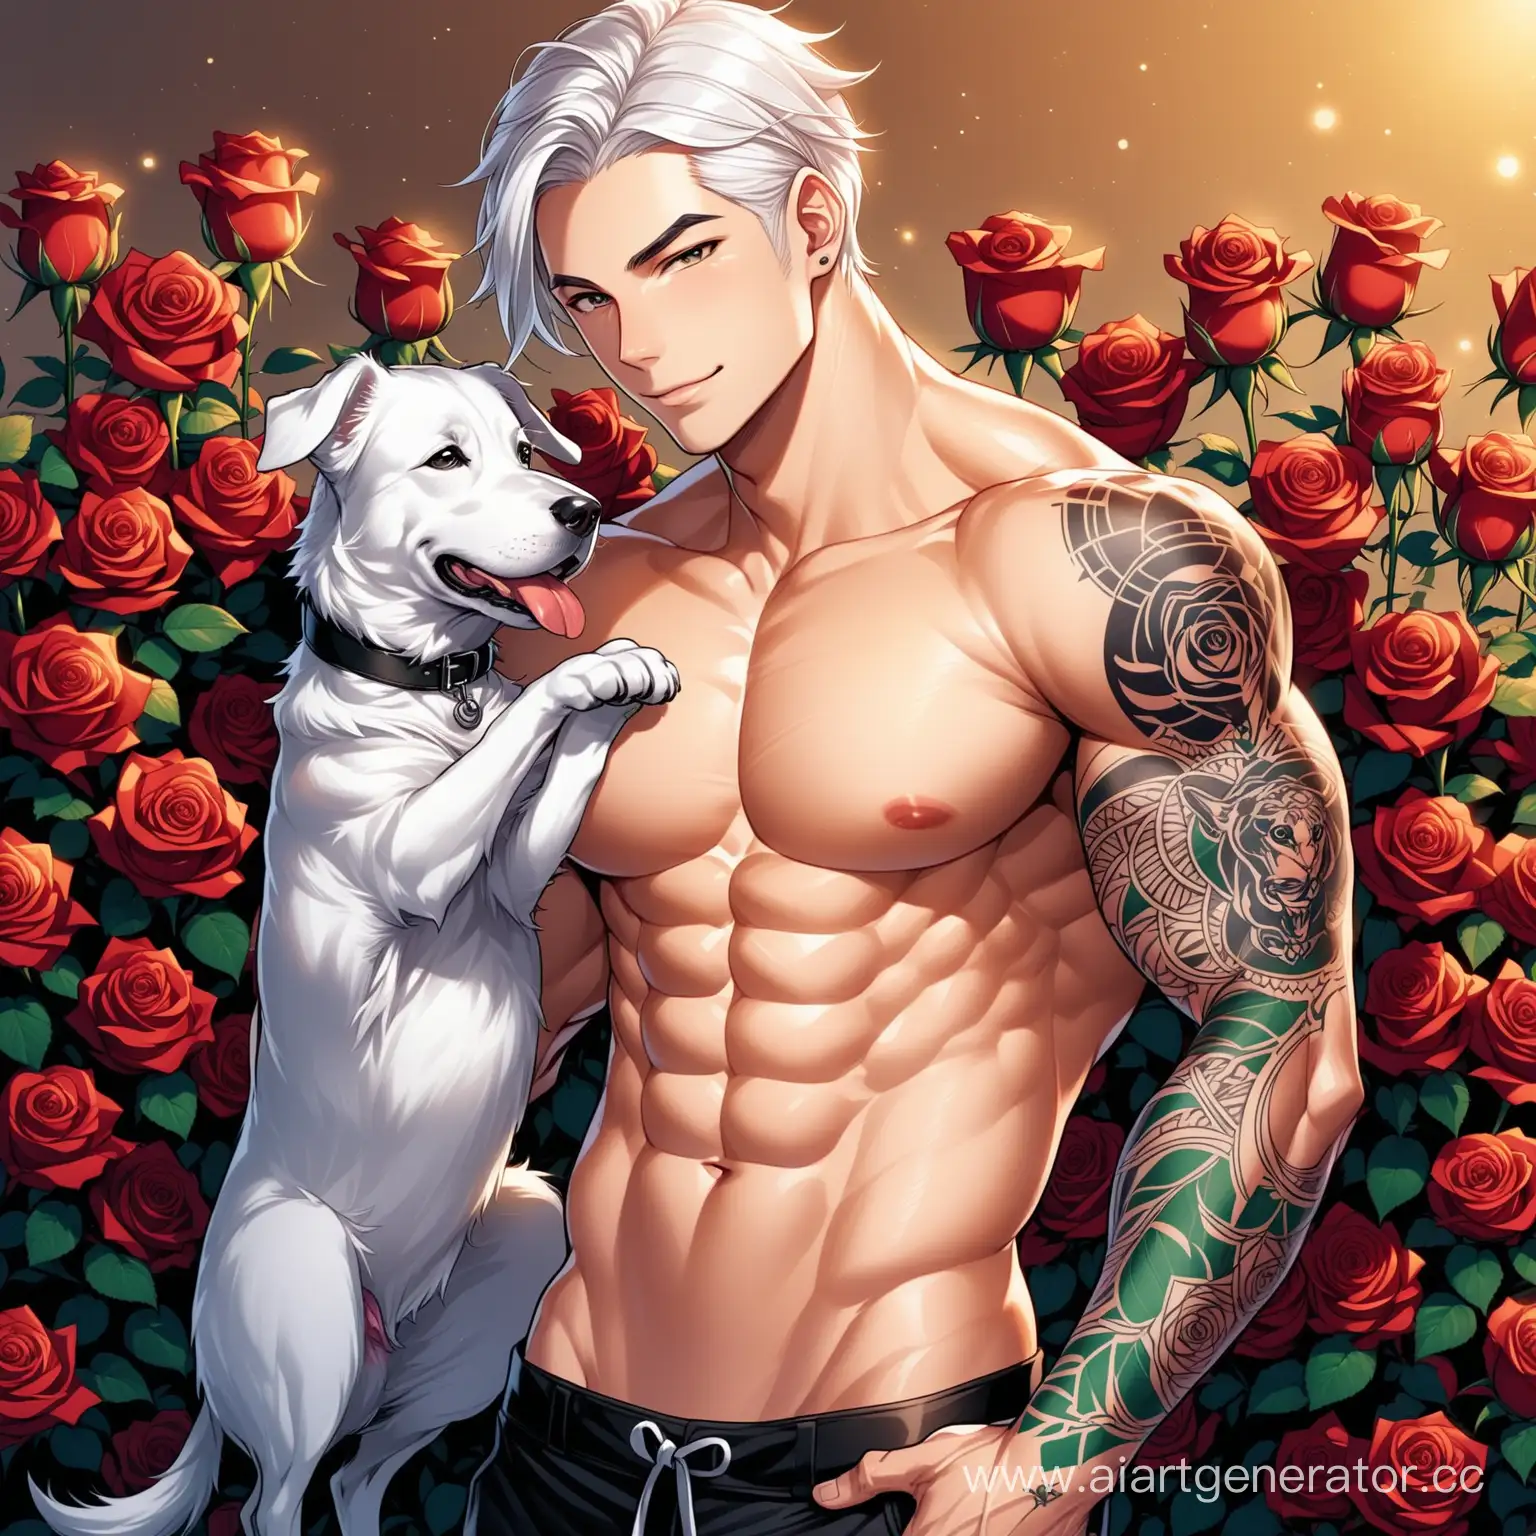 Muscular-Physicist-with-Rose-Tattoo-Wealthy-Gentlemans-Portrait